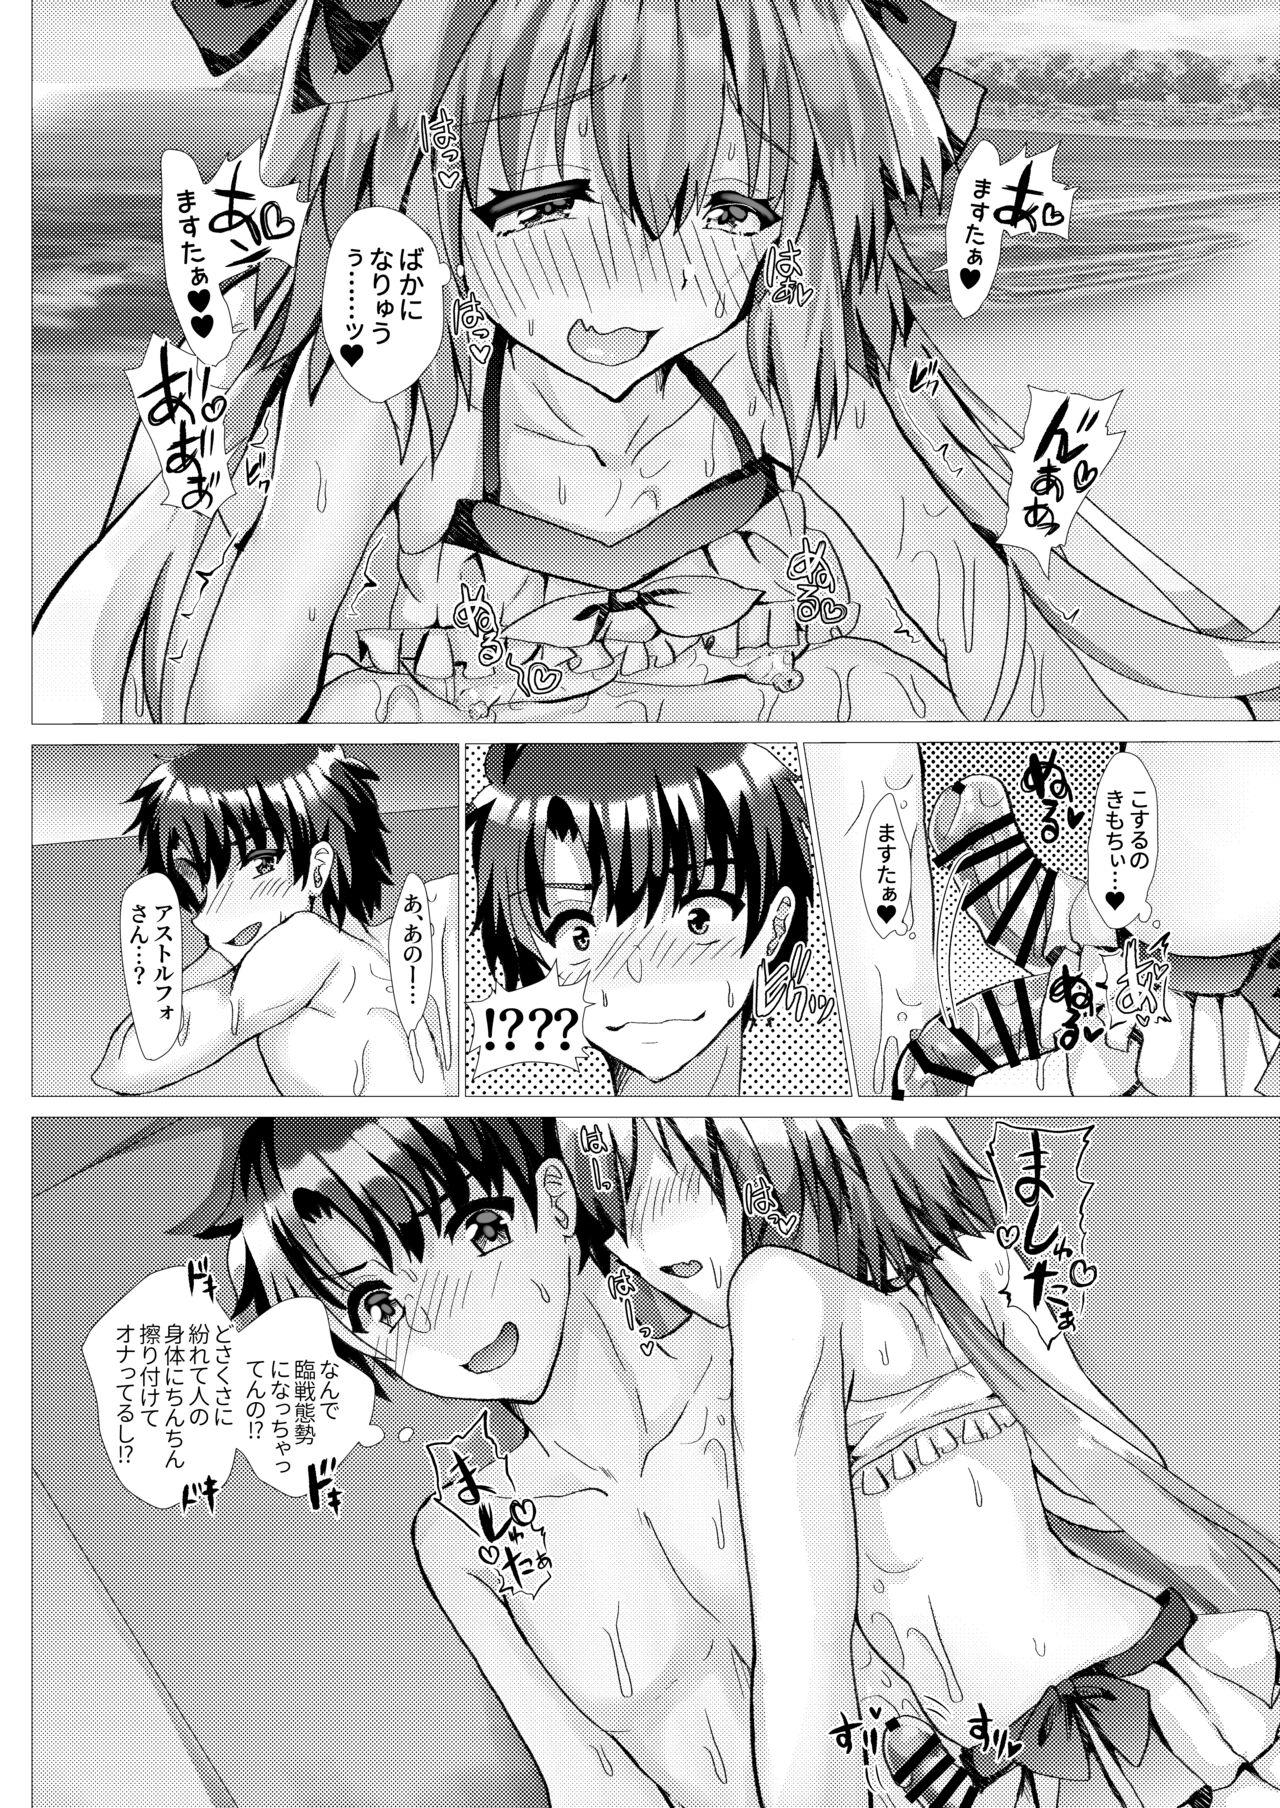 Pasivo Astolfo to Summer Vacation + Omake - Fate grand order Cumshot - Page 7